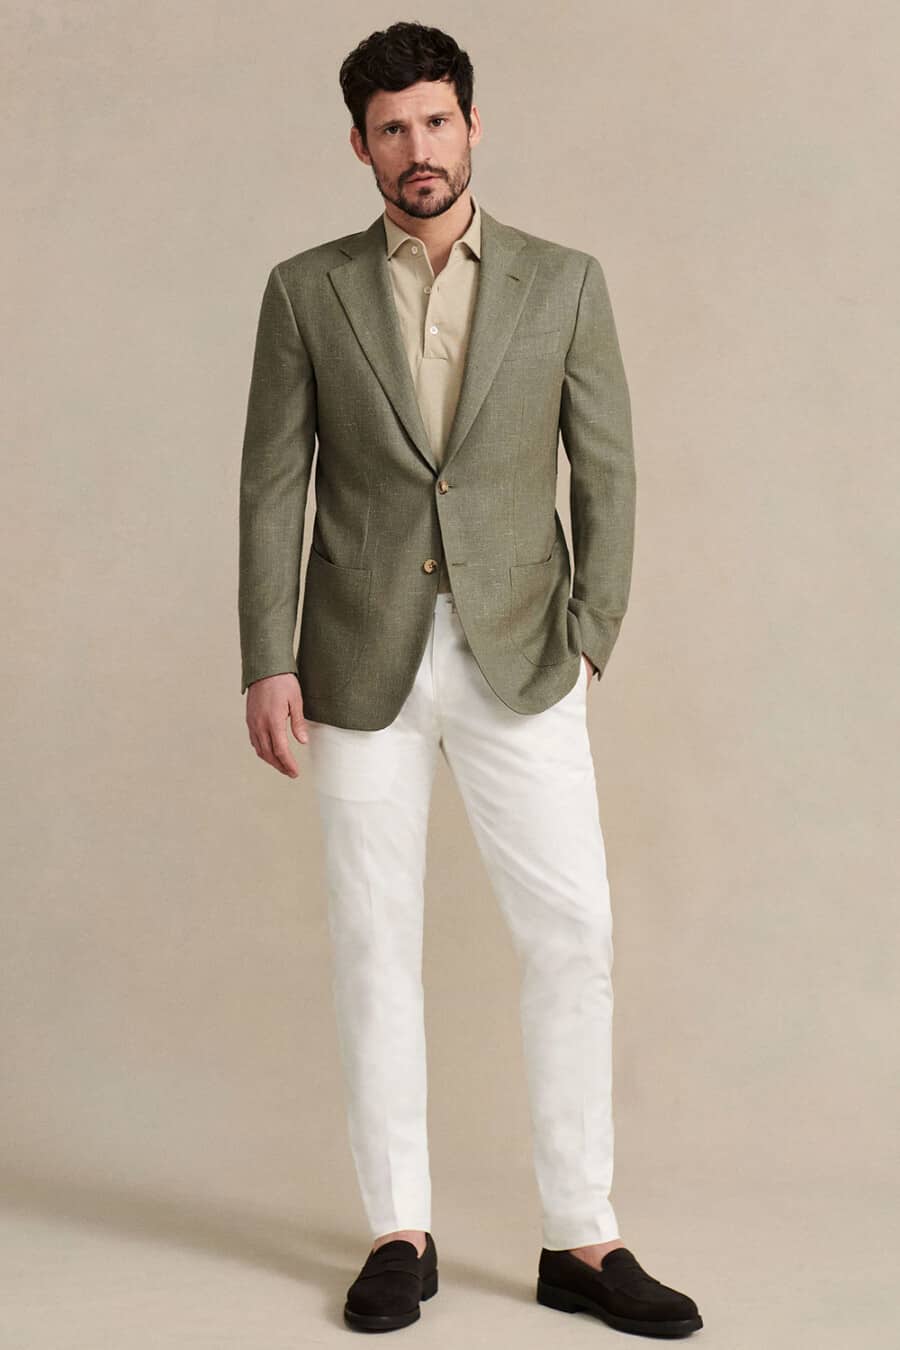 Men's white pants, beige polo shirt, green blazer and brown suede penny loafers outfit